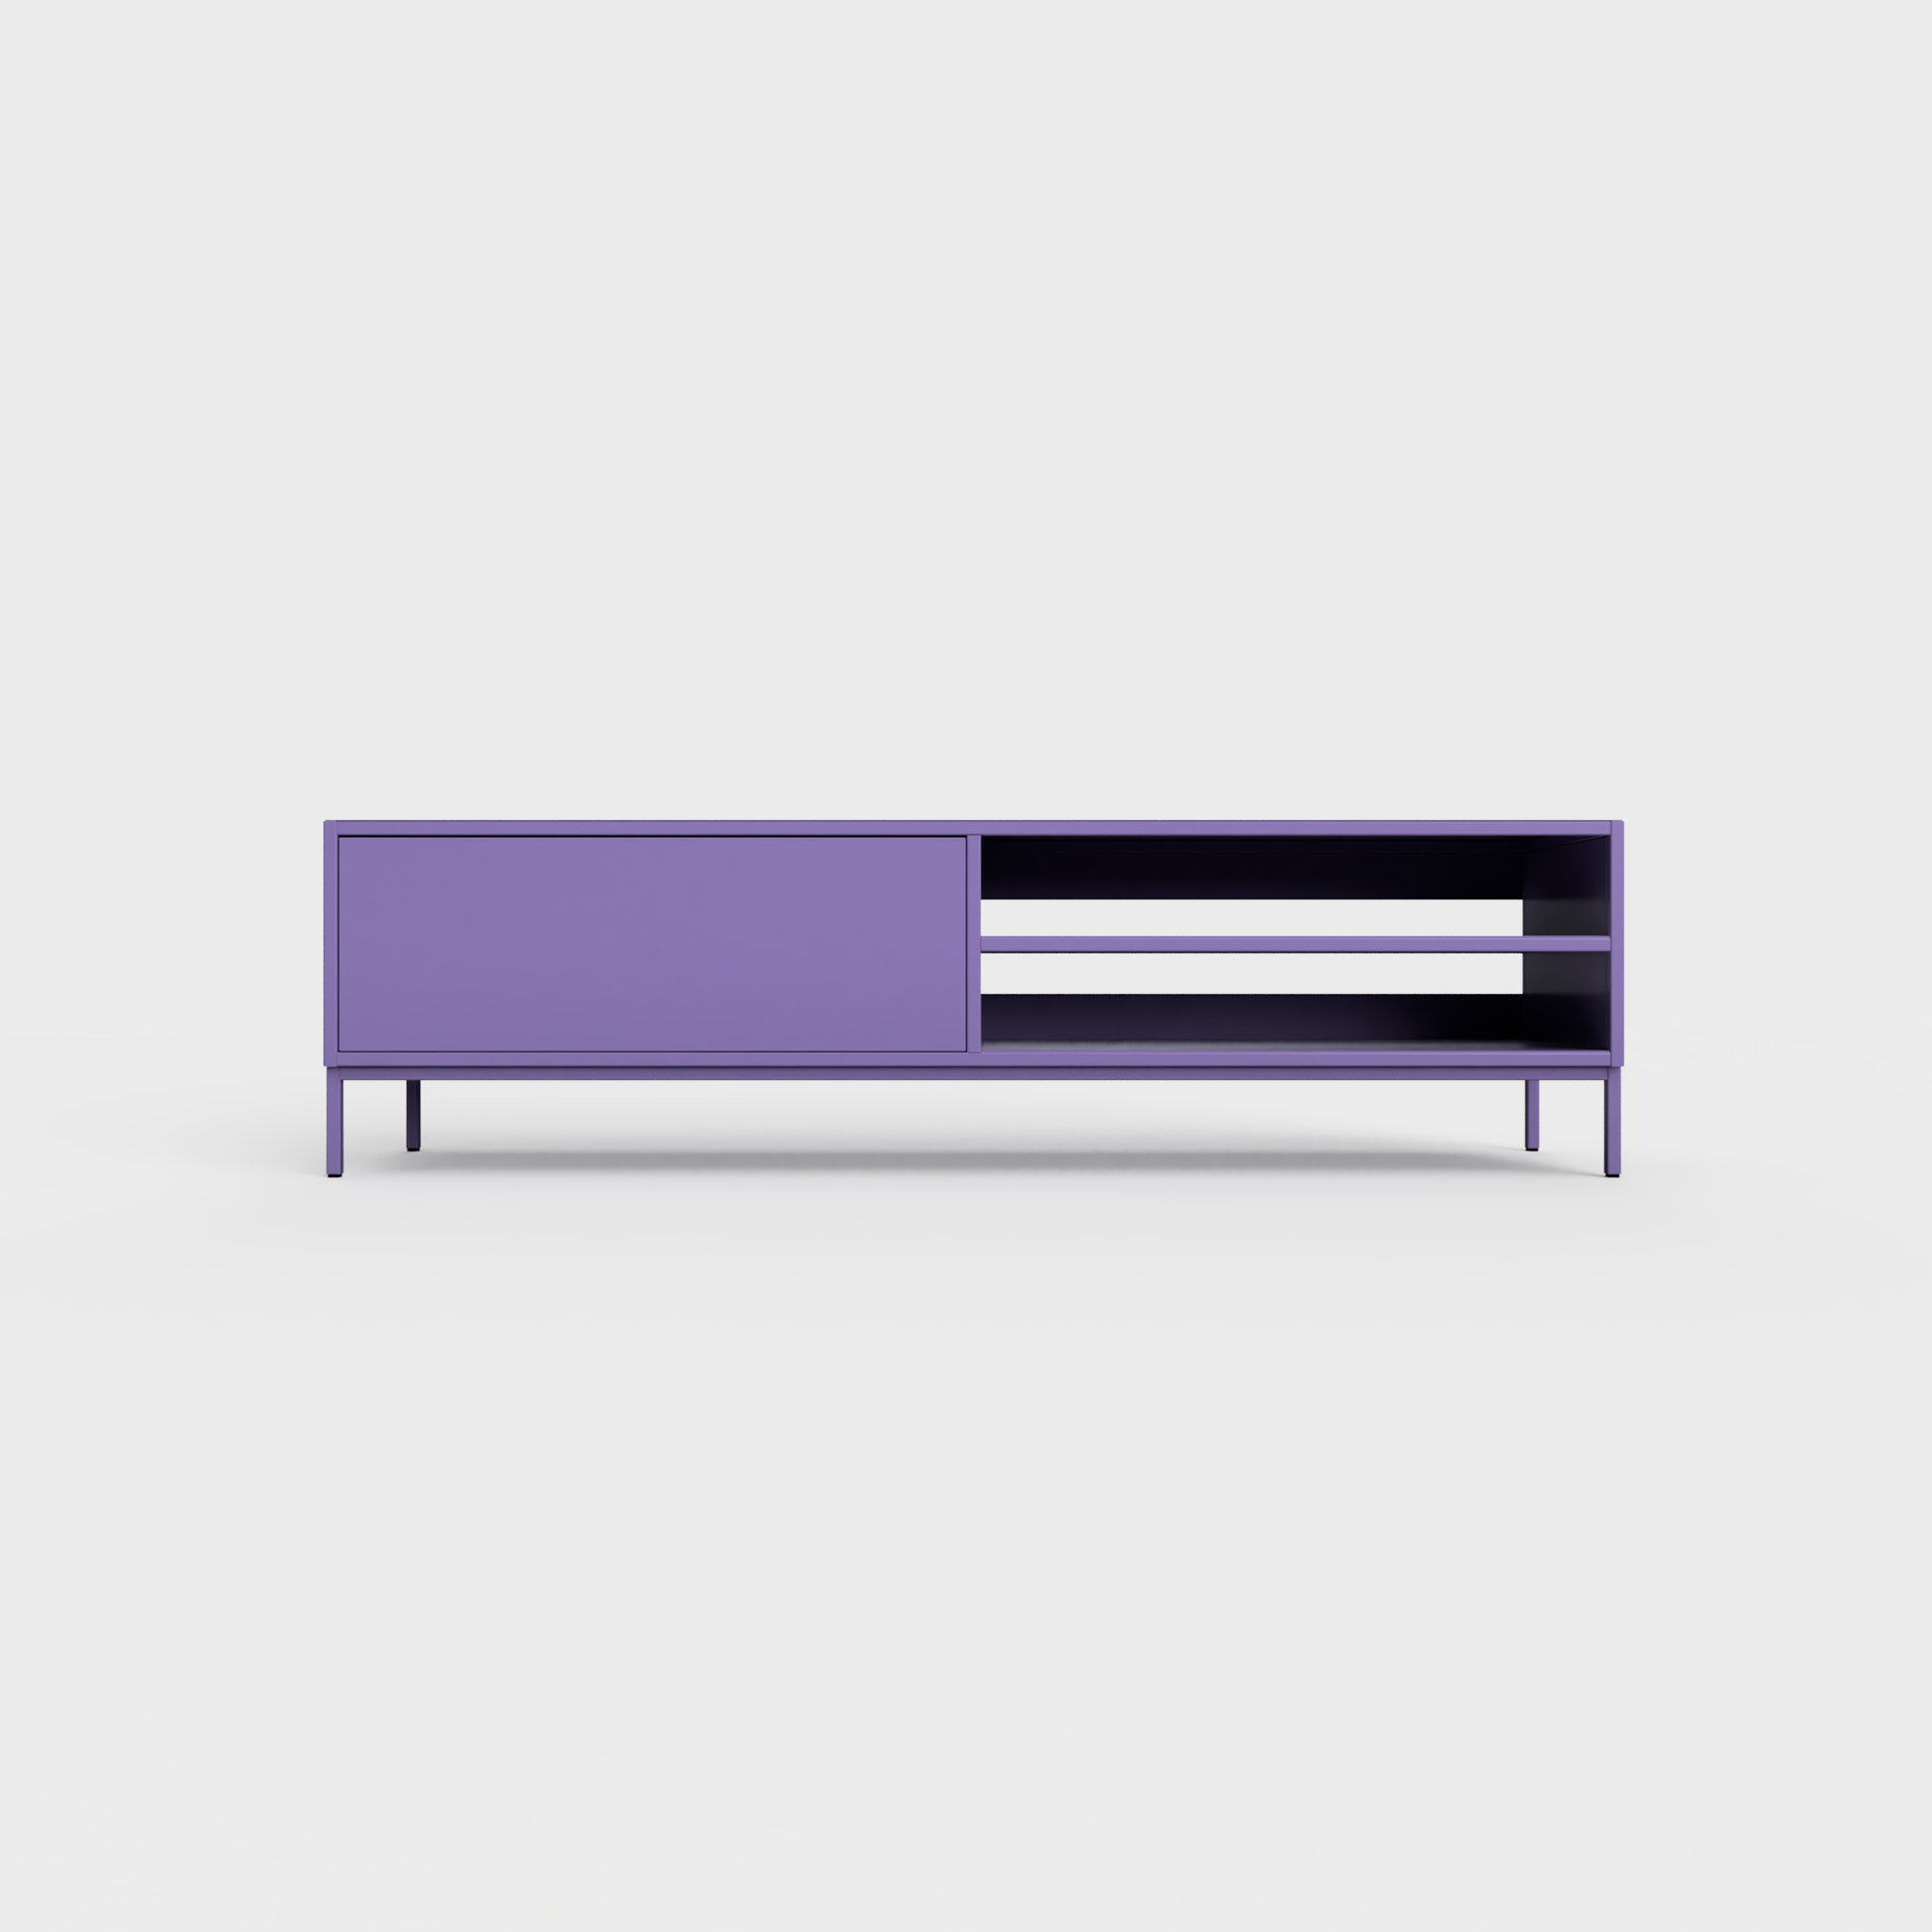 Prunus 02 Lowboard in Iris color, powder-coated steel, elegant and modern piece of furniture for your living room